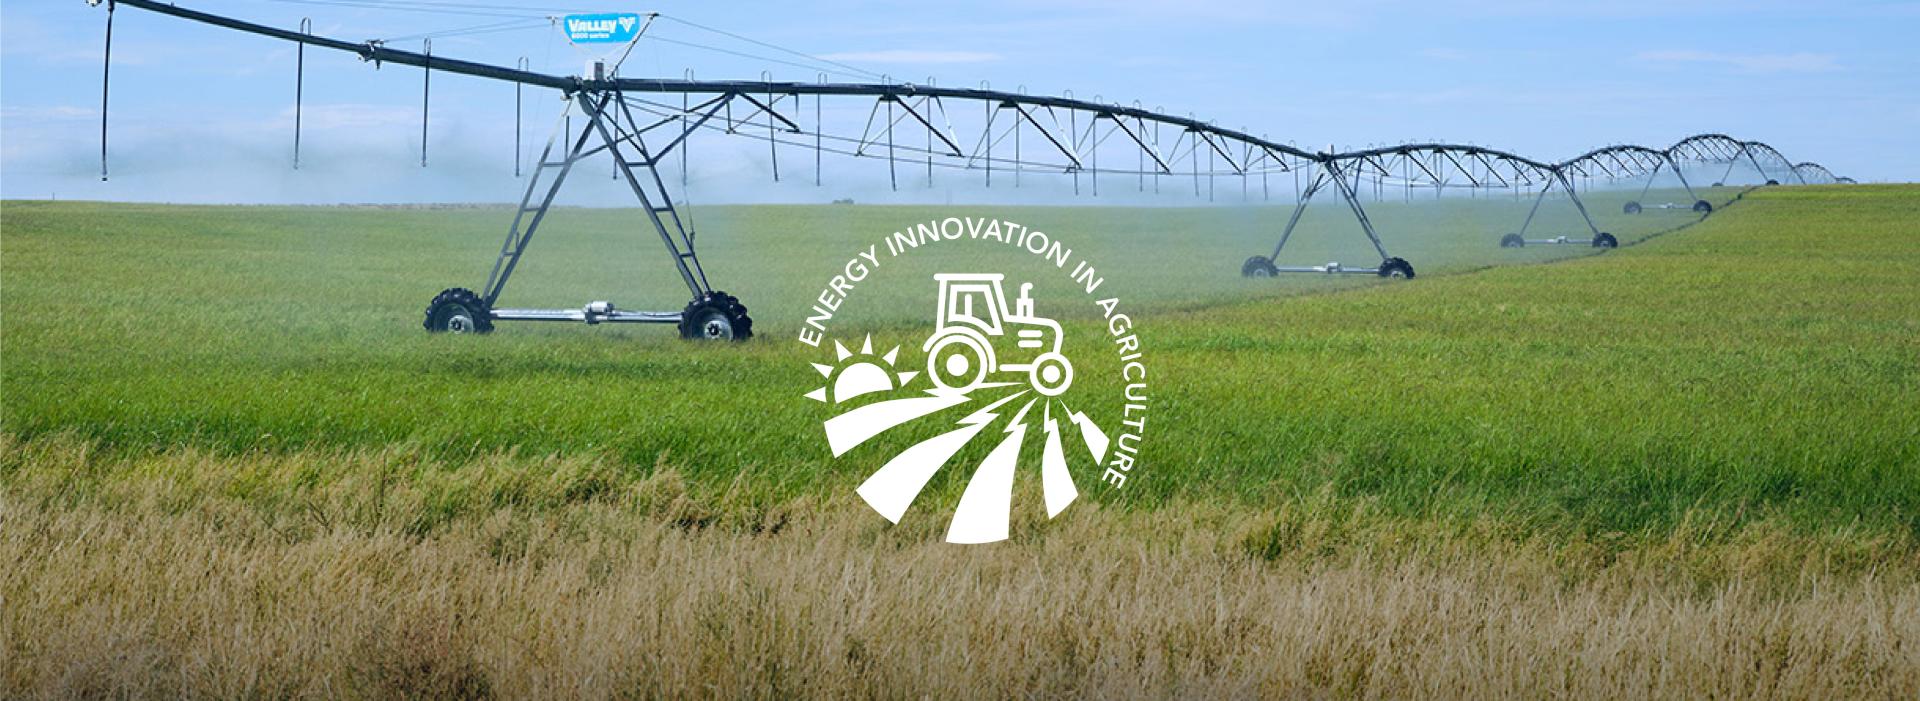 Energy Innovation in Agriculture, Tri-State G&T